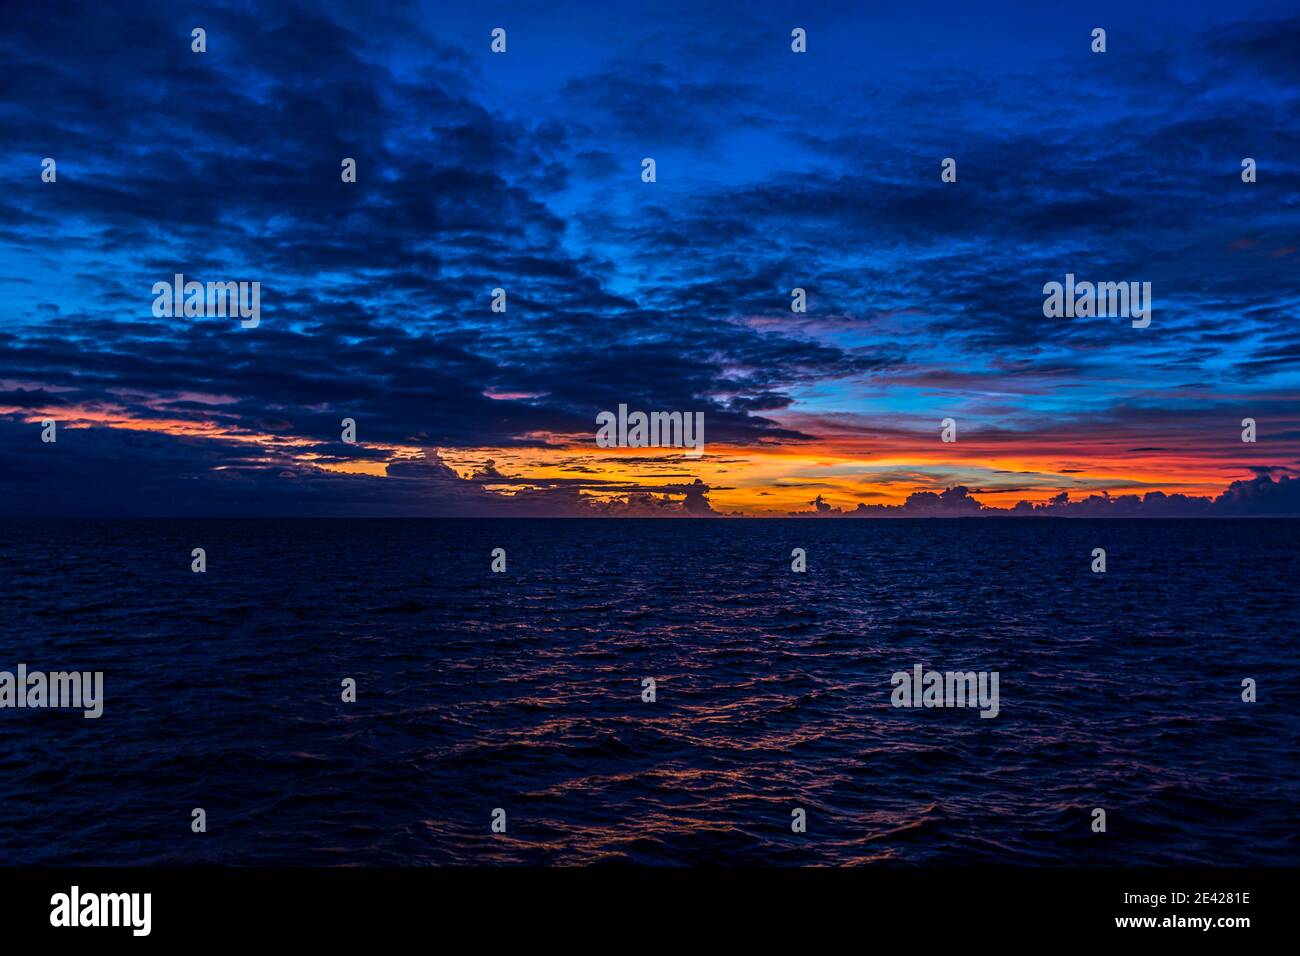 Dramatic sunset over the Pacific Ocean Stock Photo